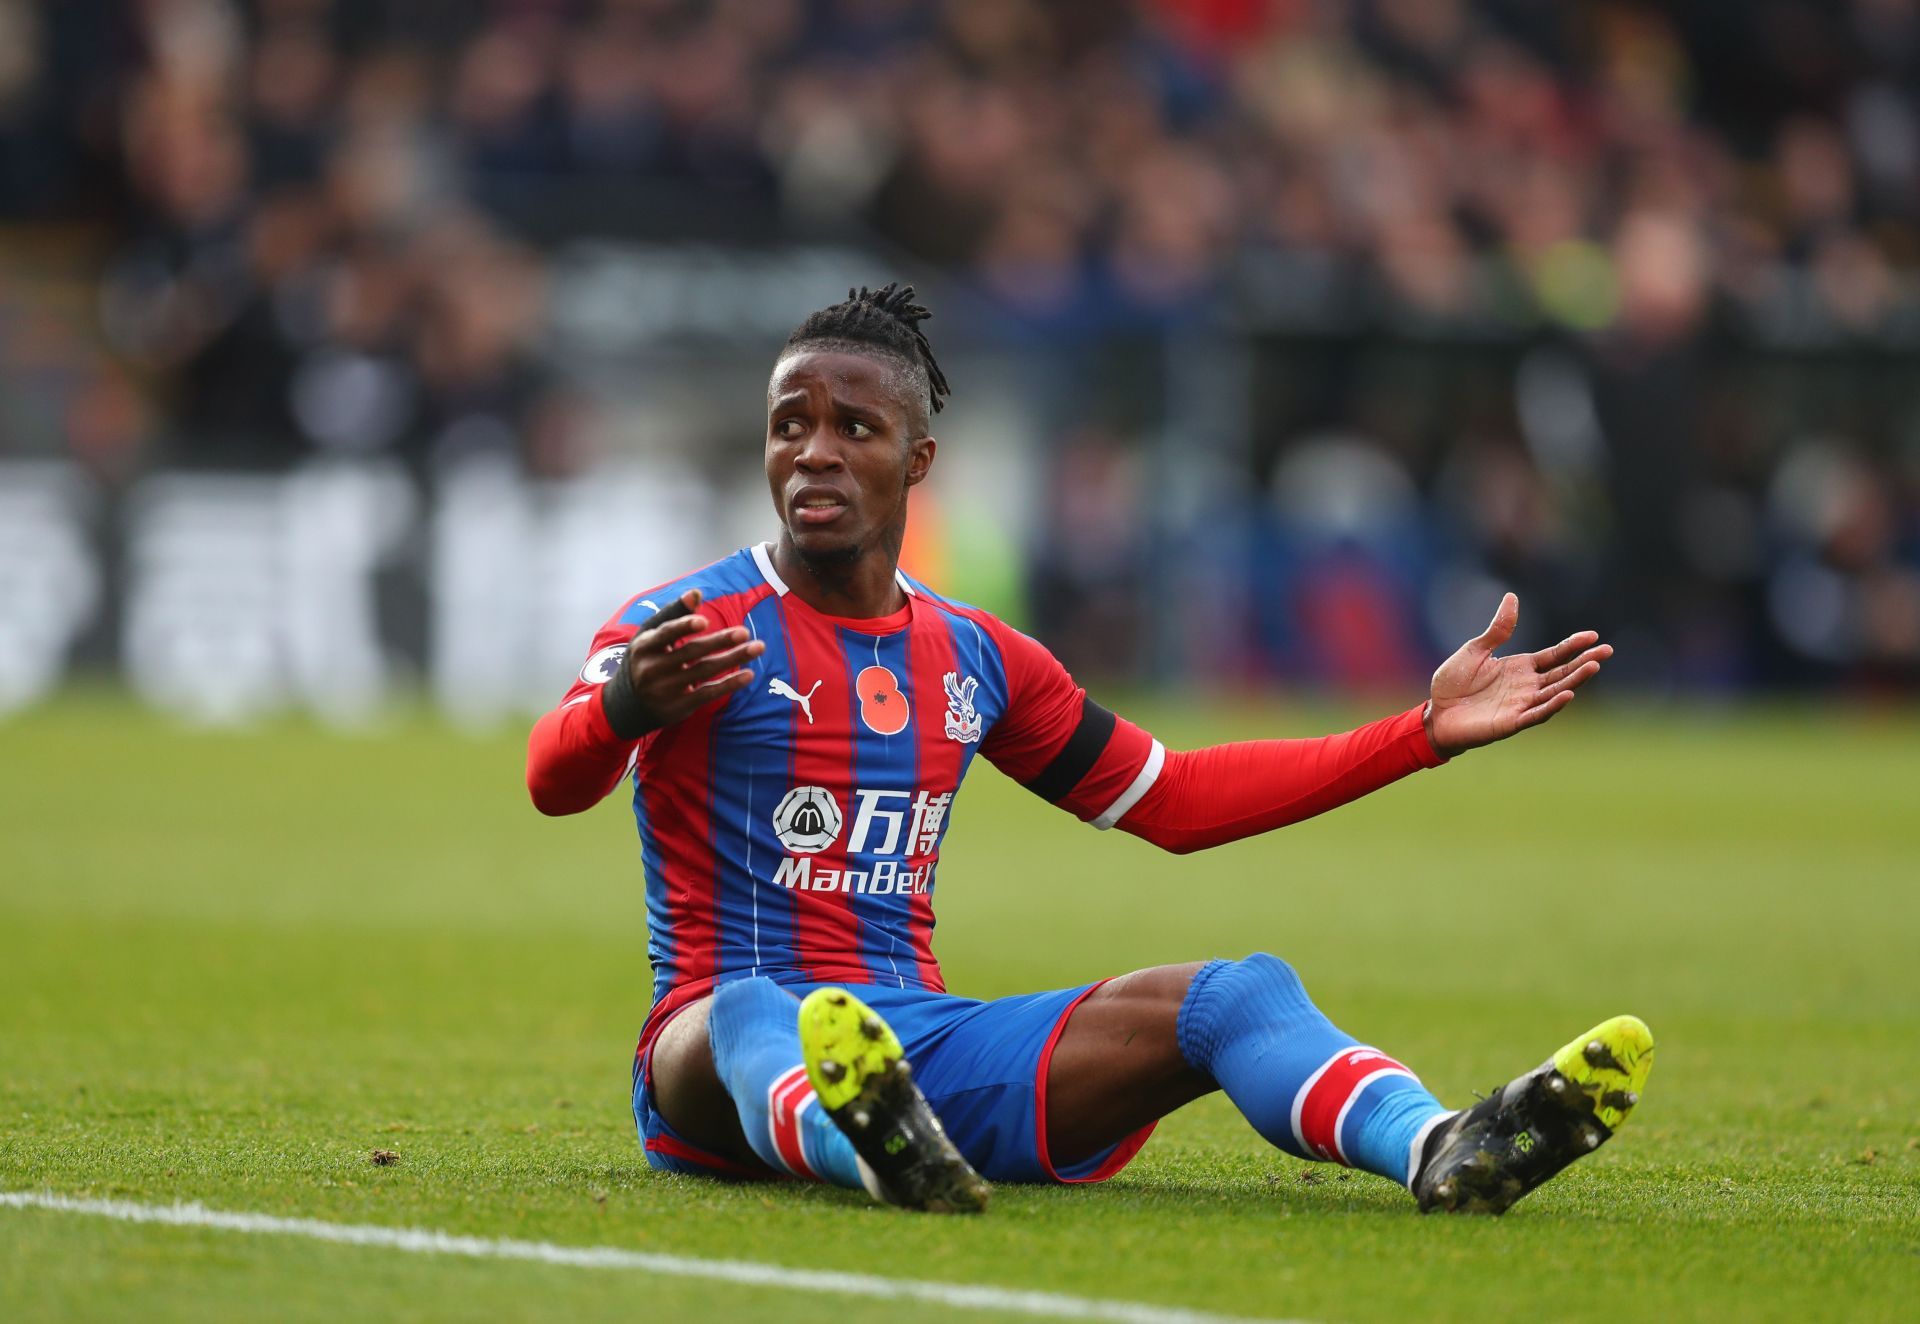 Wilfried Zaha has been one of the most consistent wingers in the Premier League